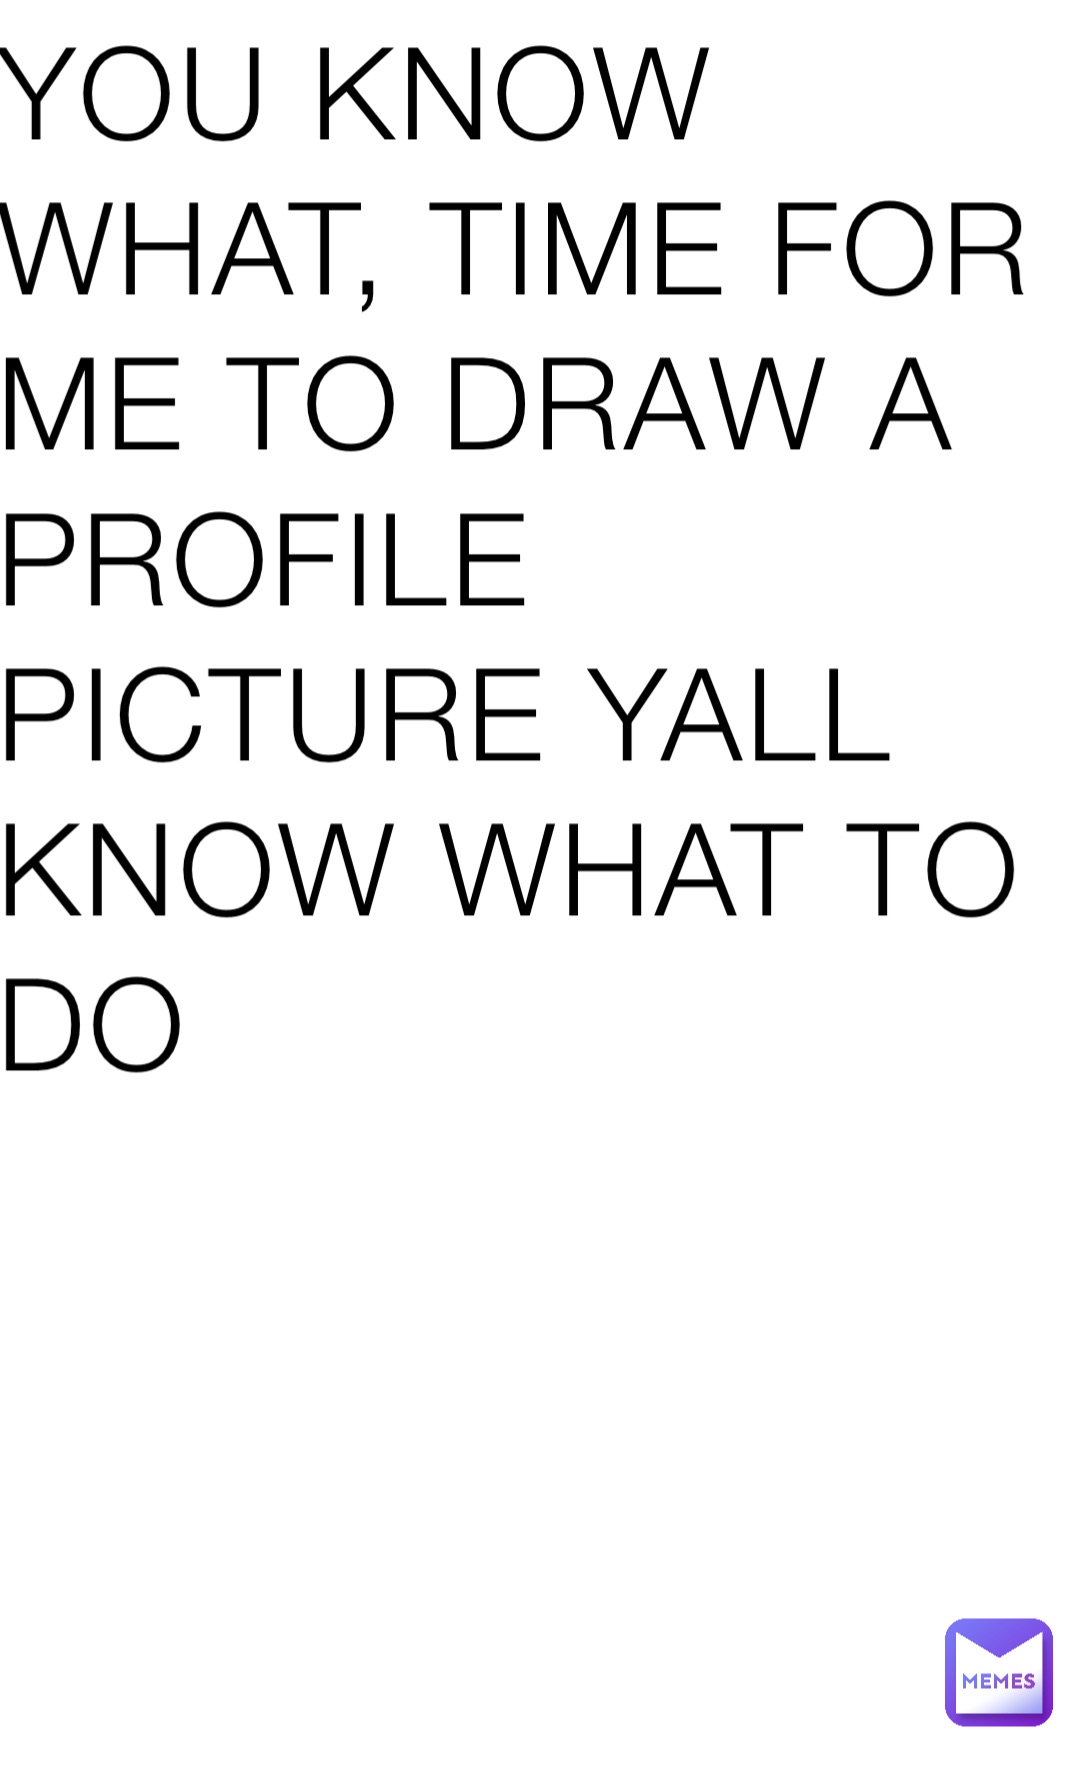 YOU KNOW WHAT, TIME FOR ME TO DRAW A PROFILE PICTURE YALL KNOW WHAT TO DO